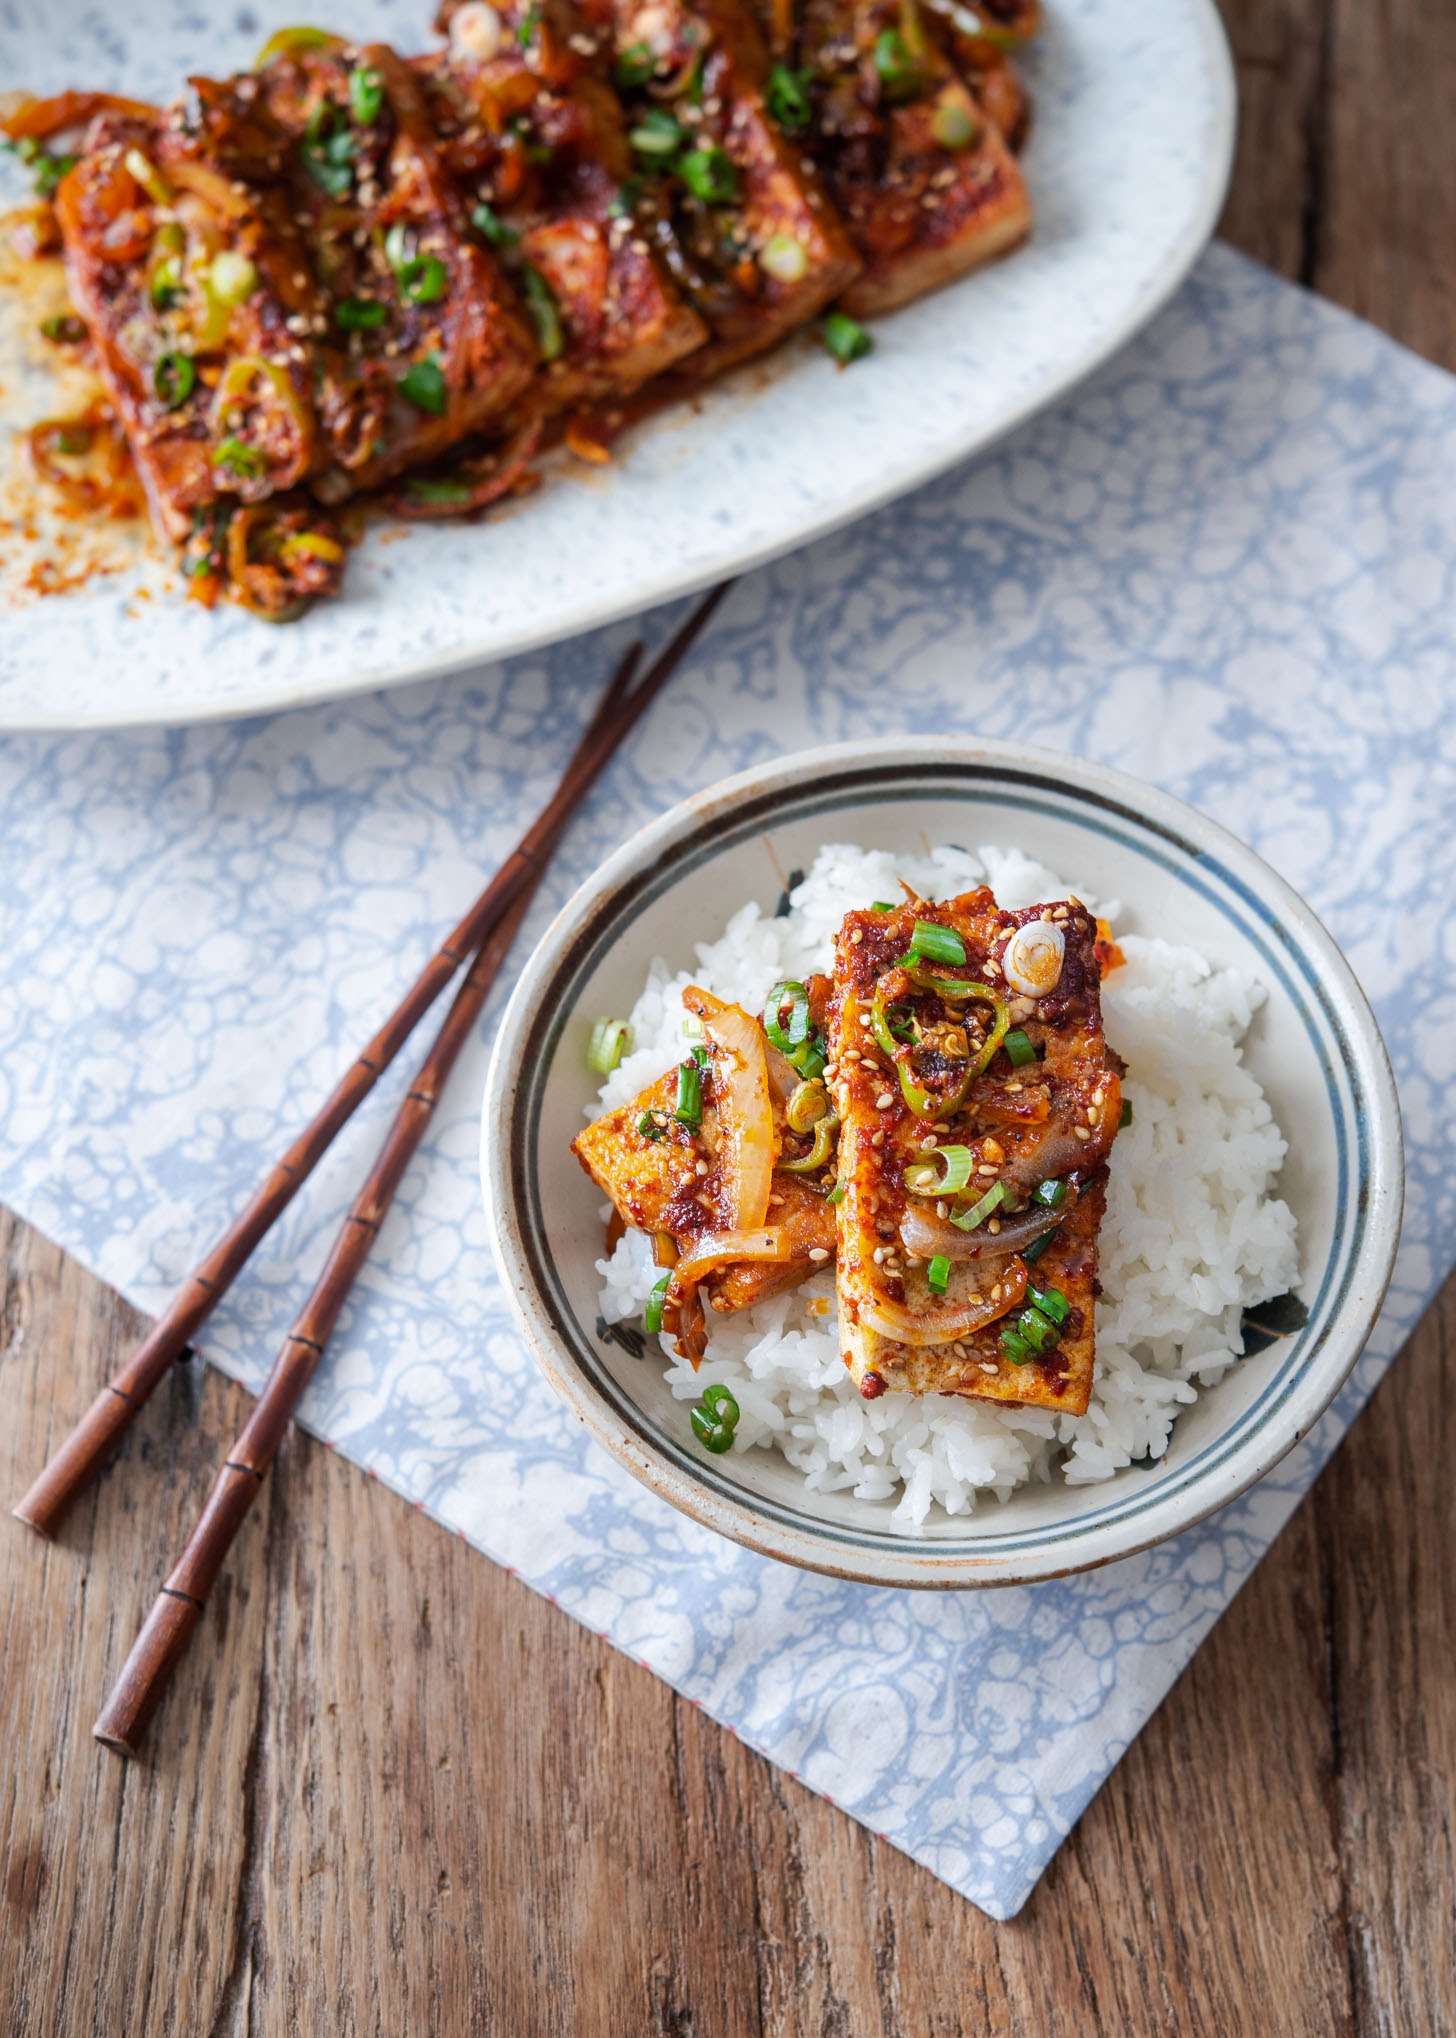 Korean braised tofu slices on top of a bowl of rice.